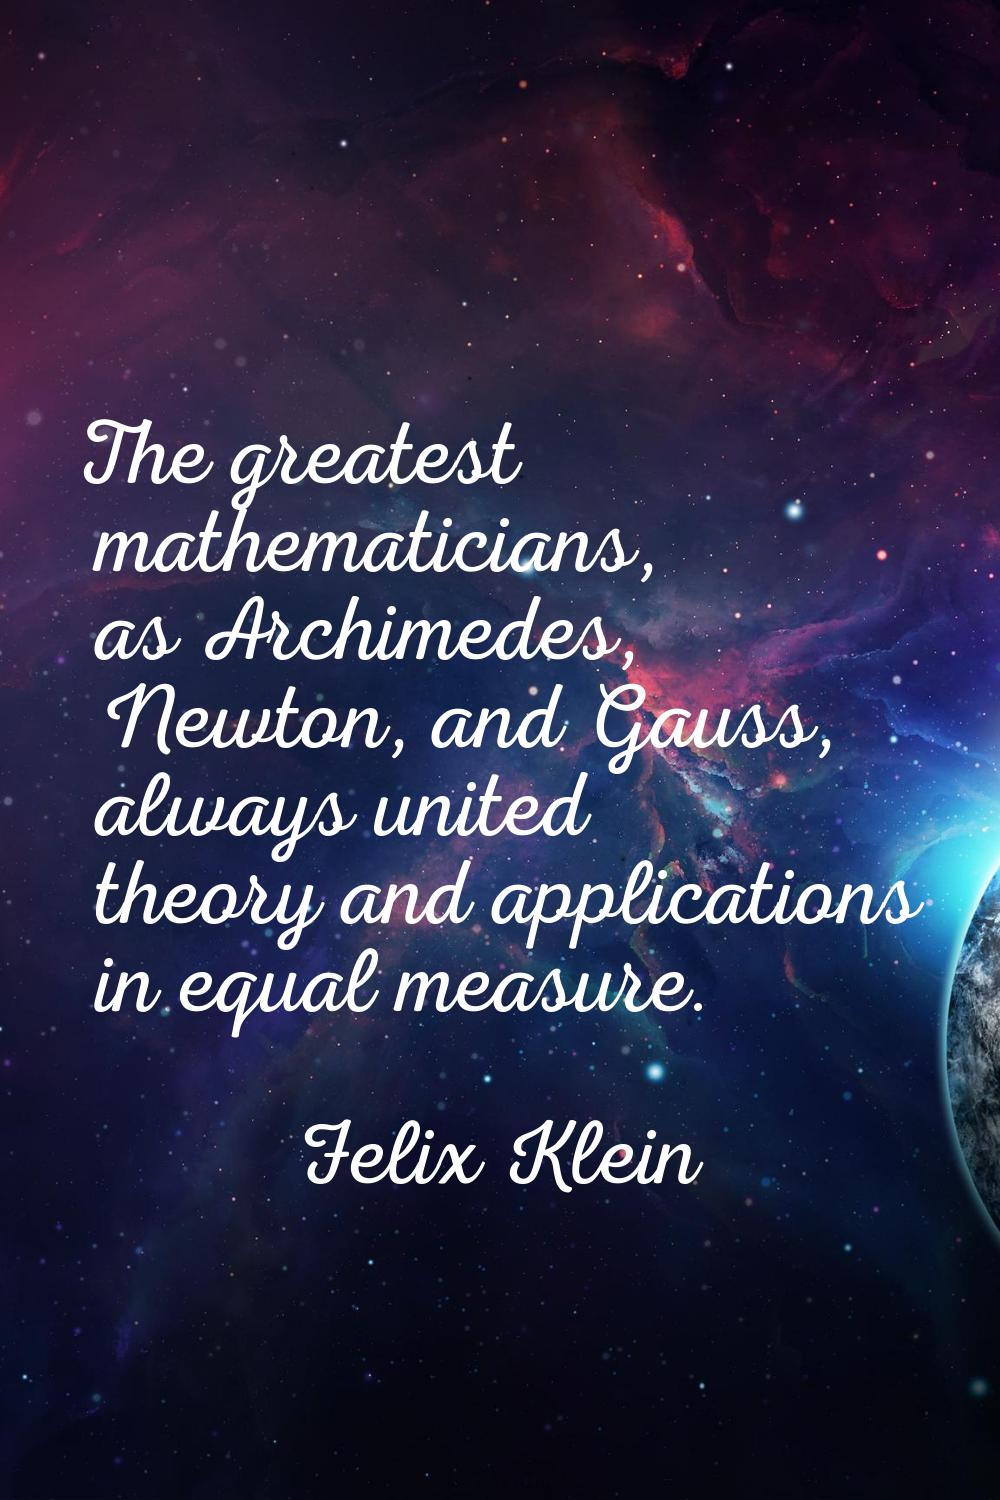 The greatest mathematicians, as Archimedes, Newton, and Gauss, always united theory and application